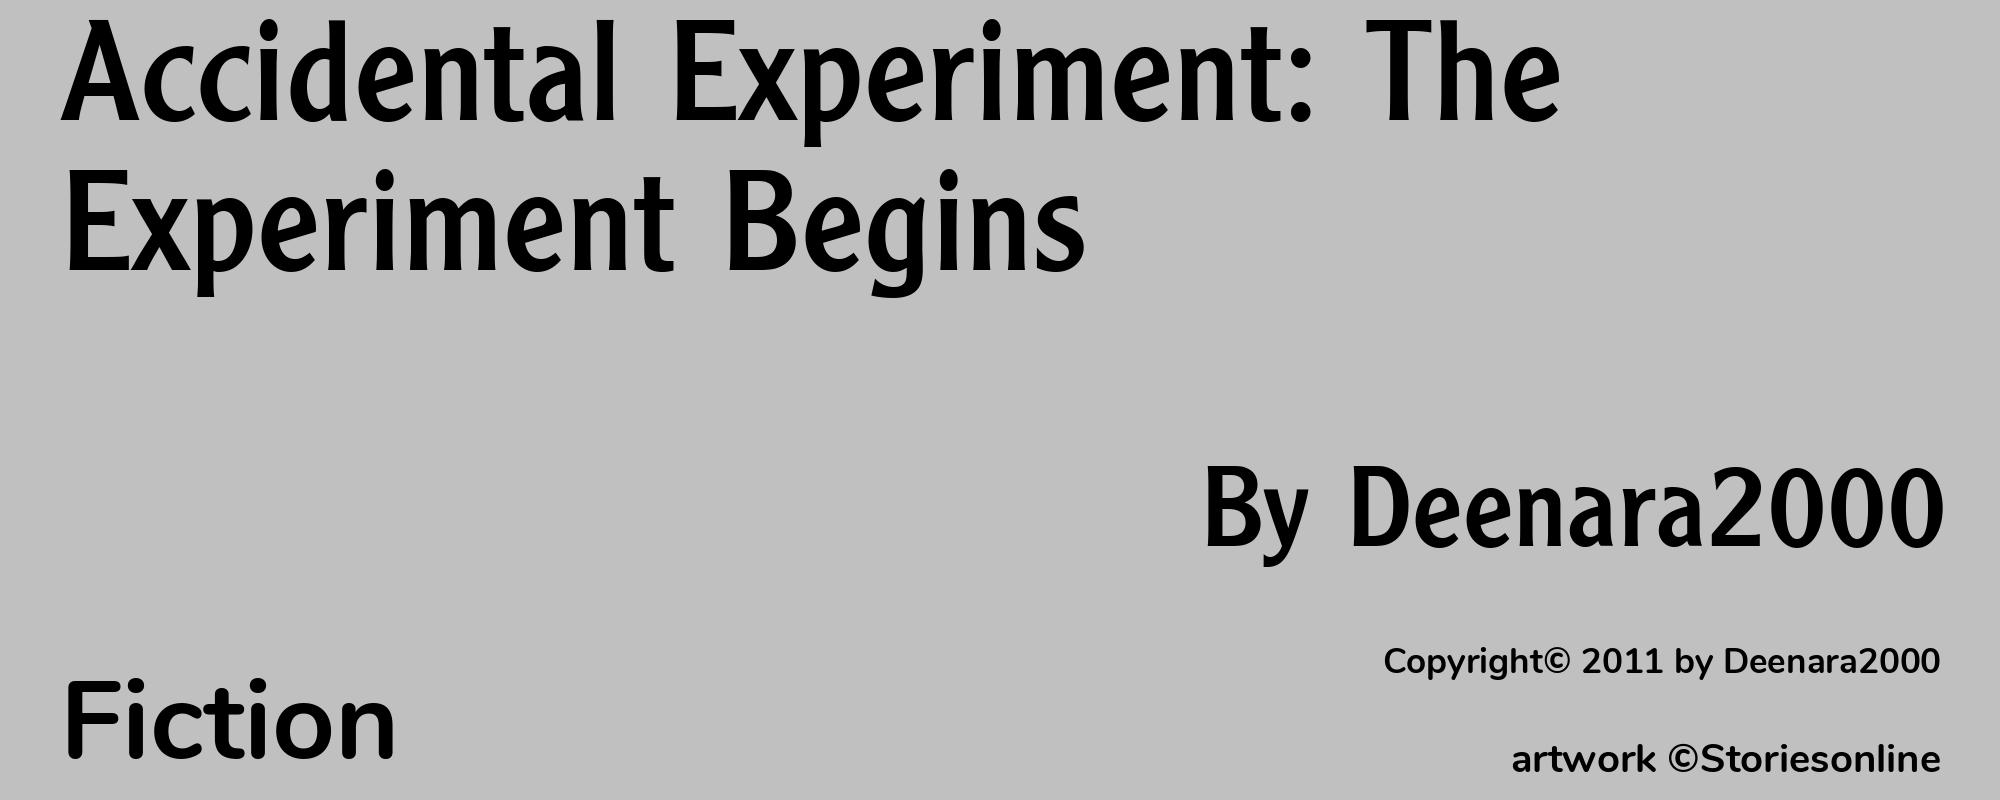 Accidental Experiment: The Experiment Begins - Cover